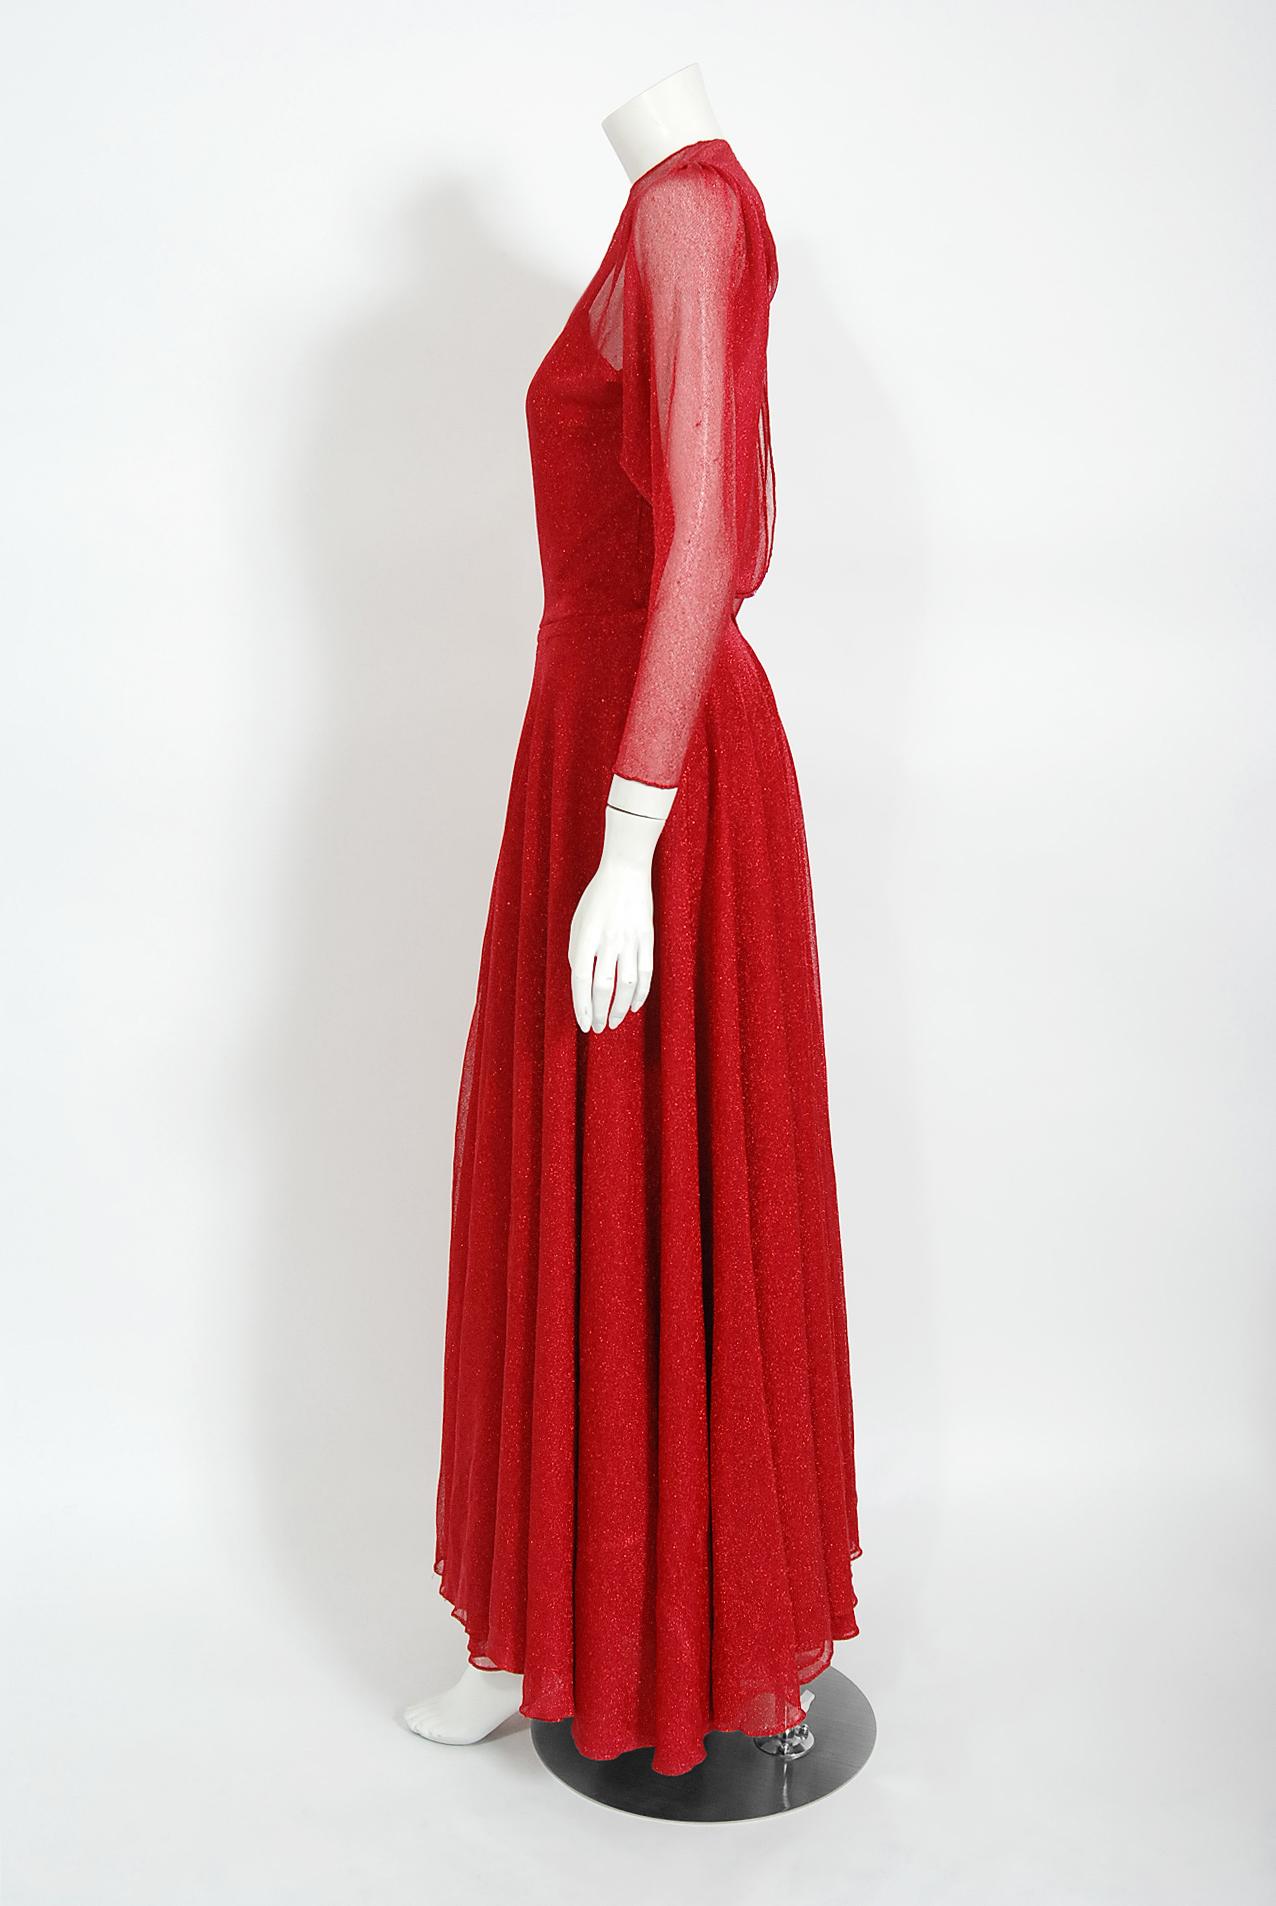 Vintage 1970's Halston Couture Red Metallic Sheer Knit Long-Sleeve Dress Gown For Sale 1